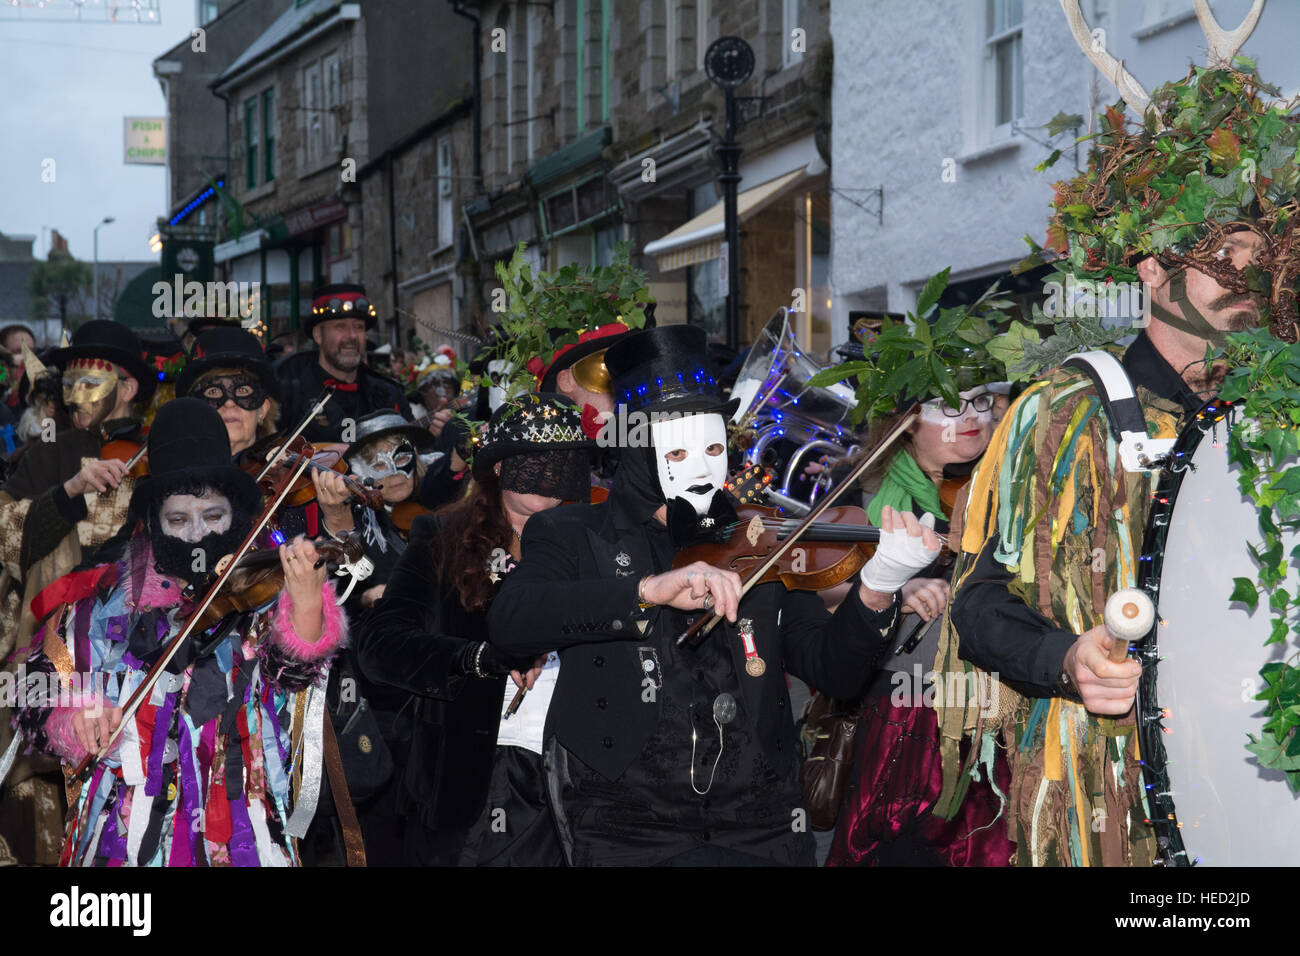 Penzance, Cornwall, UK. 21st December 2016. The annual Montol festival held on the date of the feast of St Thomas the Apostle and the winter solstice. Guise processions and lantern parades take place leading to the chalking of the Mock. The first parade seen here at sundown. Credit: Simon Maycock/Alamy Live News Stock Photo